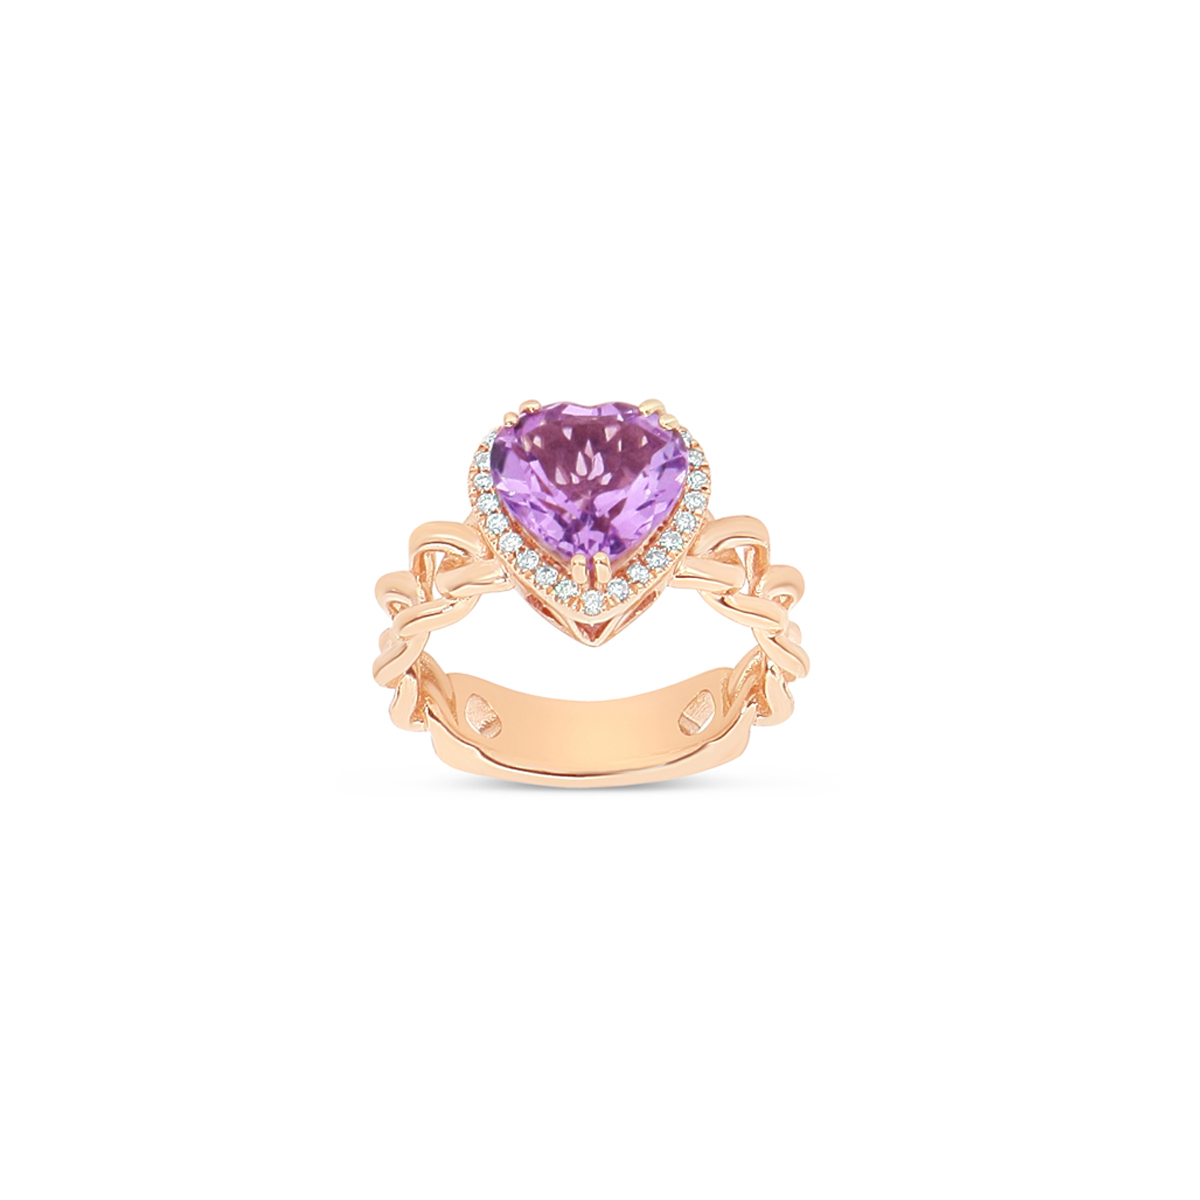 Heart Shaped Purple Amethyst Ring with White Diamonds